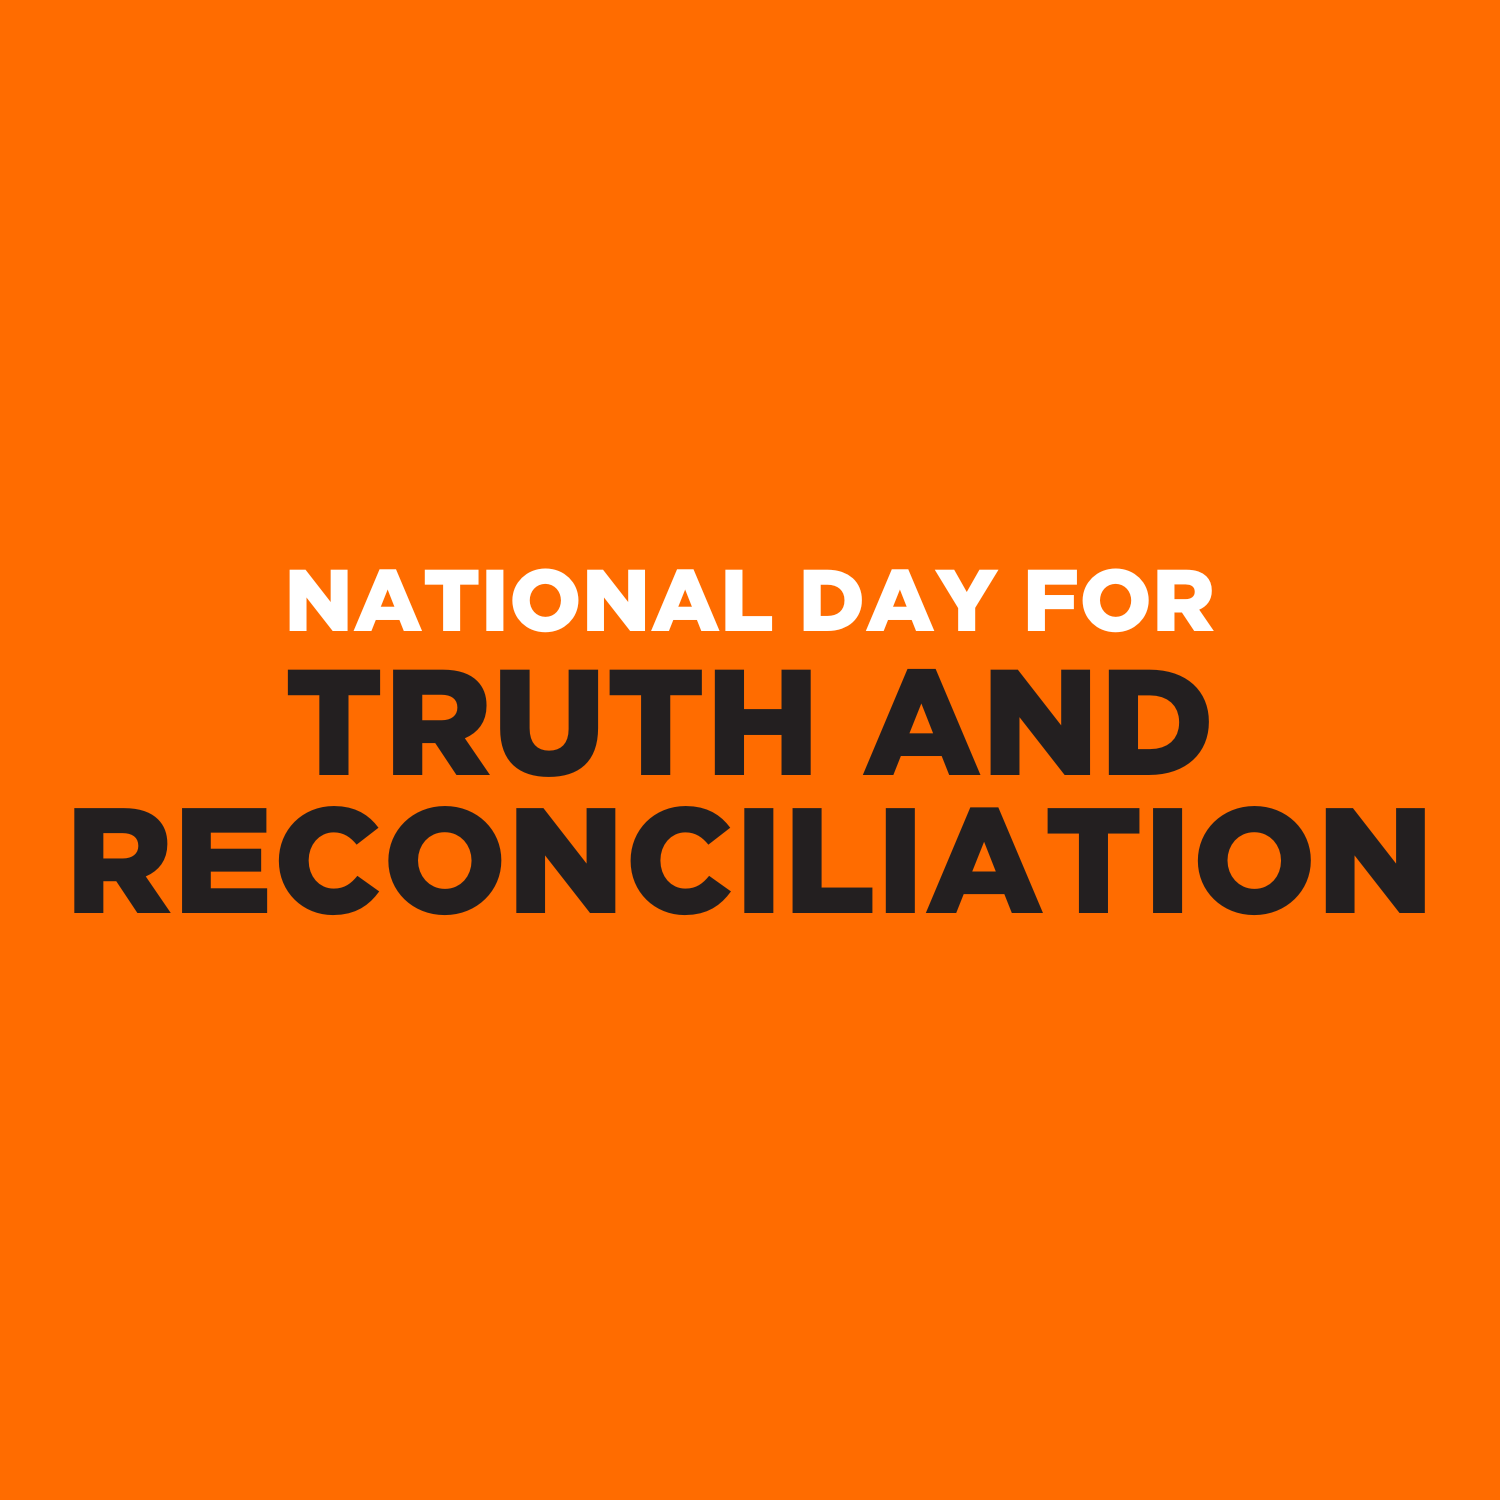 National Day for truth and reconciliation